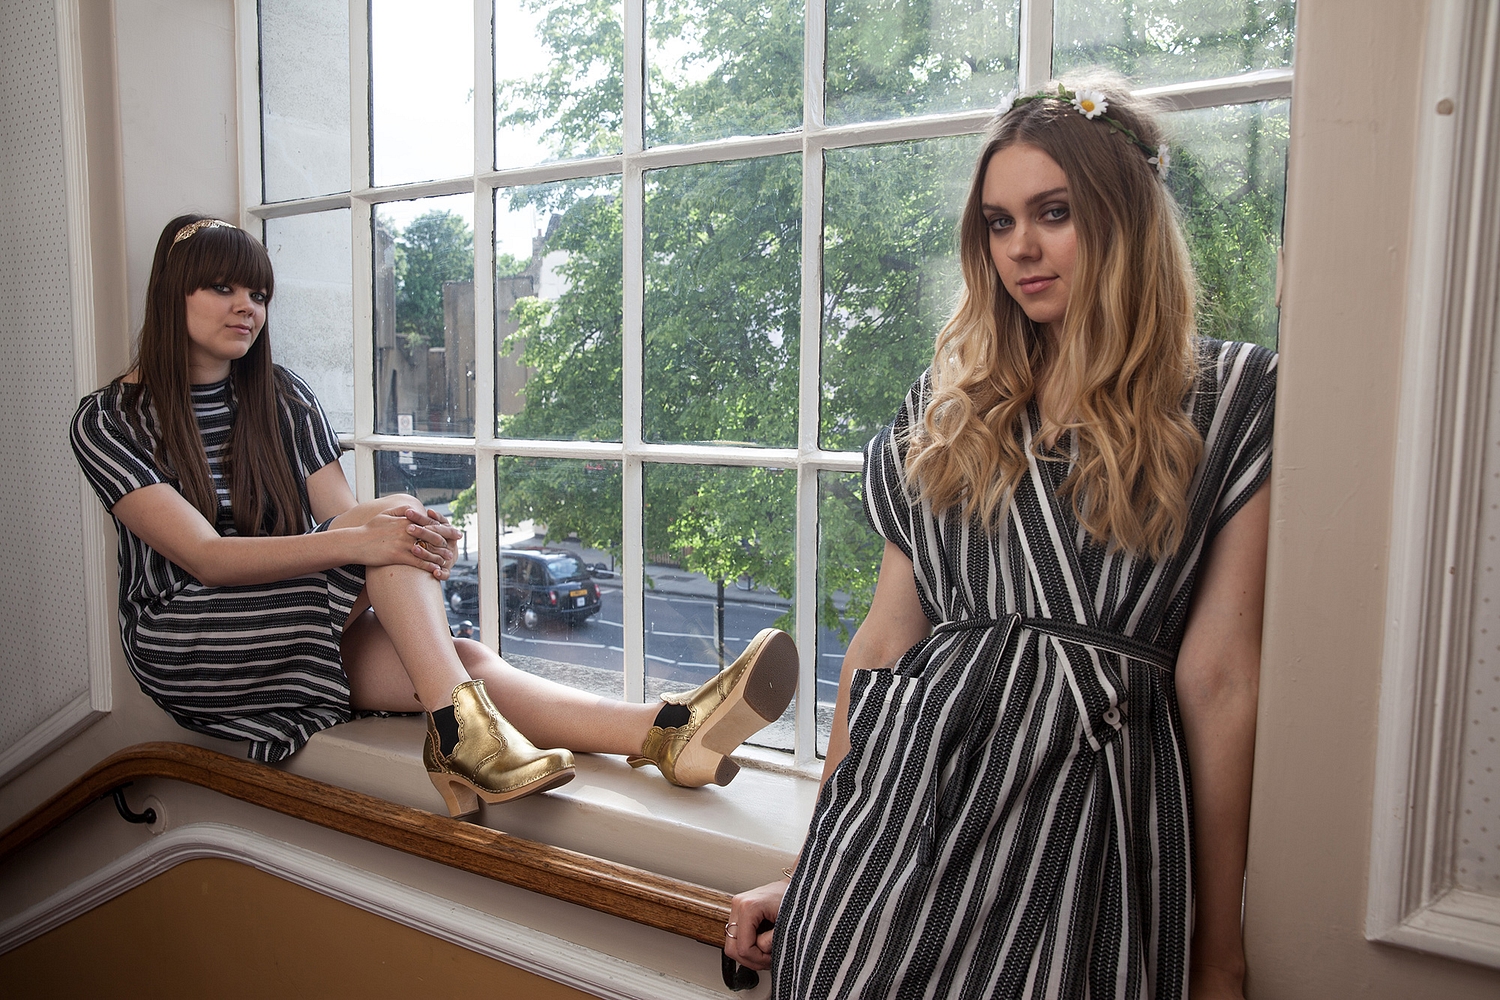 First Aid Kit release crafty new video for ‘Master Pretender’